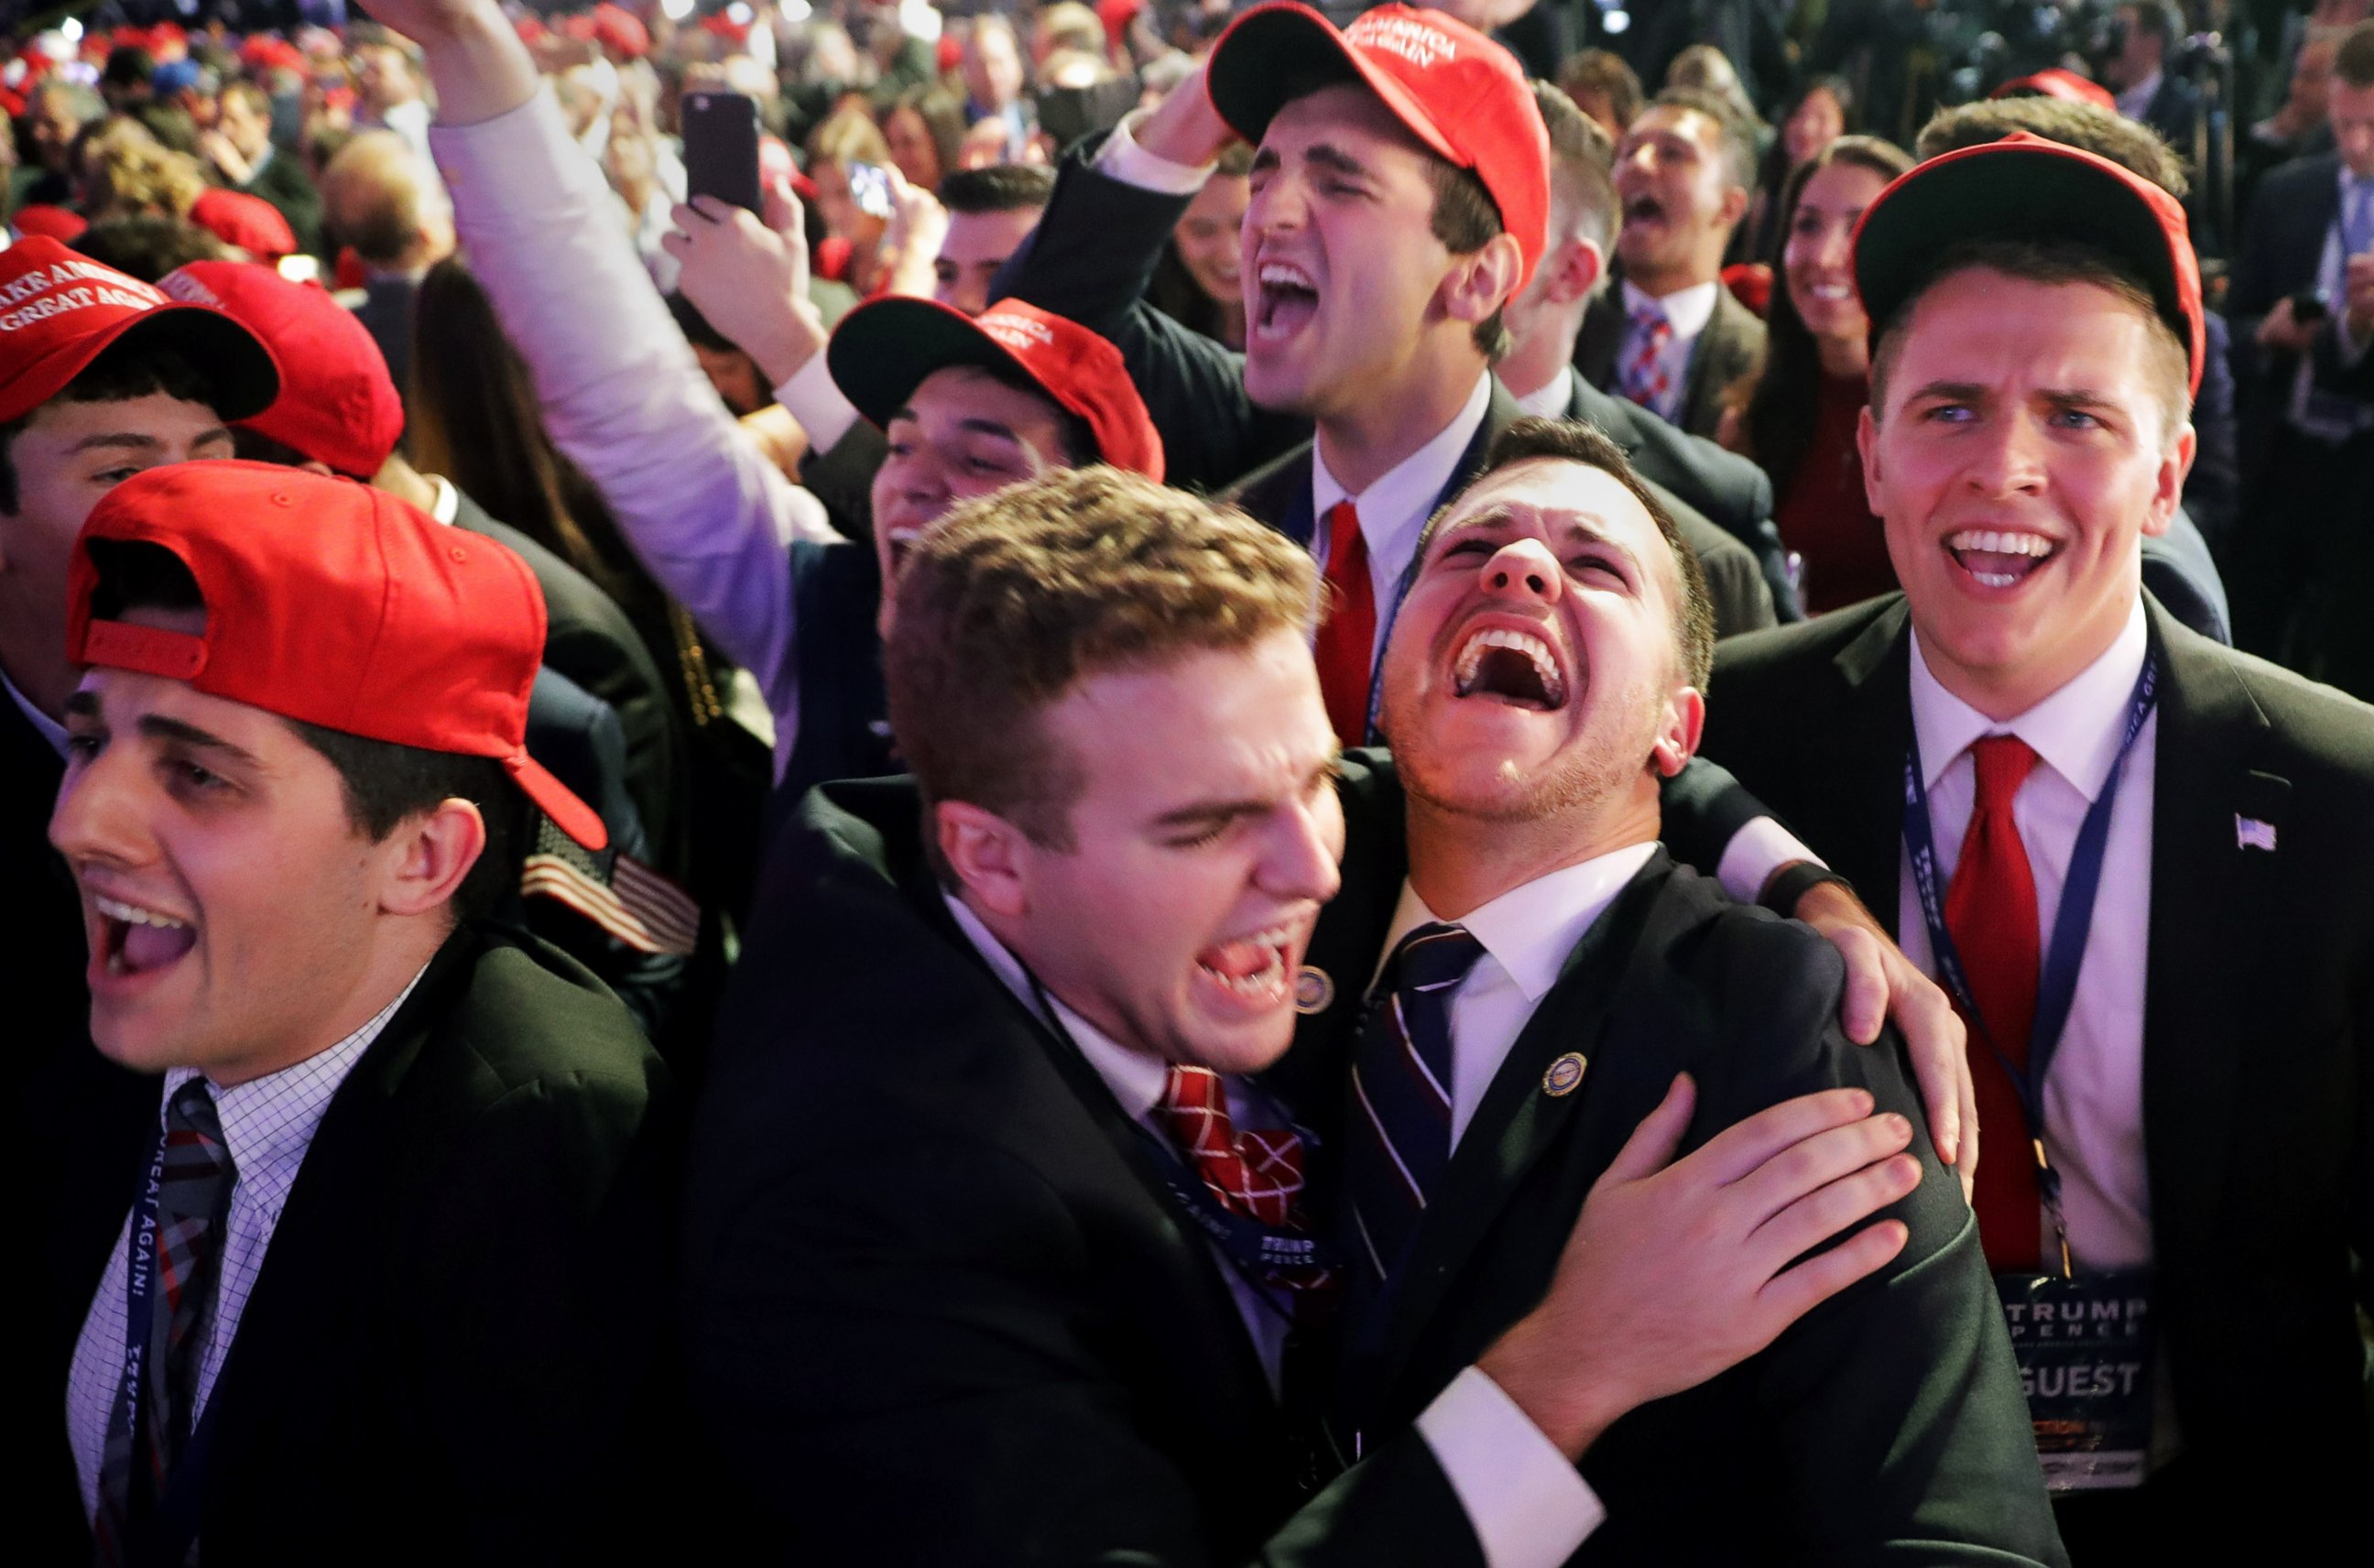 PHOTO: People cheer as voting results for Iowa come in at Donald Trump's election night event at the New York Hilton Midtown on Nov. 8, 2016 in New York City.